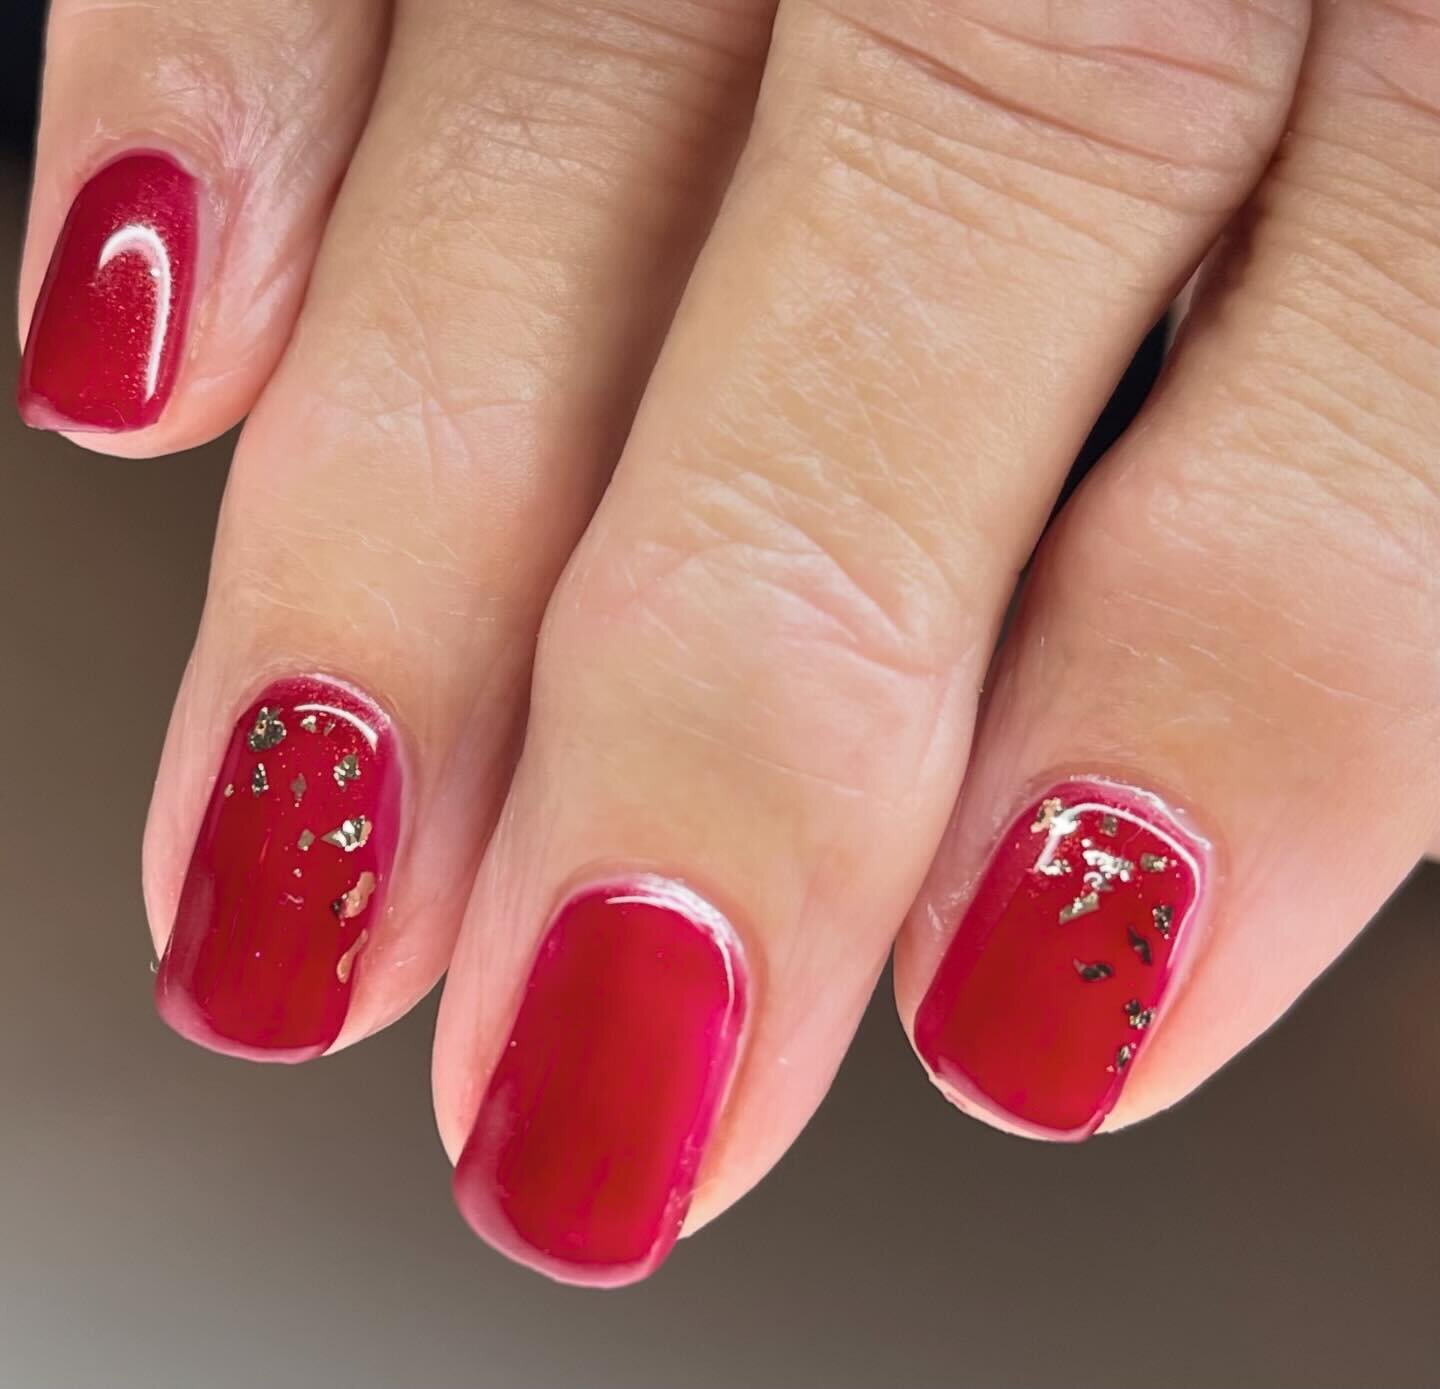 ❤️ red nails with gold leaf ❤️
I love a bit of gold leaf, it&rsquo;s so elegant and finishes off a manicure perfectly sometimes. 
#goldleaf #manicure #nails #clevedonnails #rednails #biosculpturenails #clanails